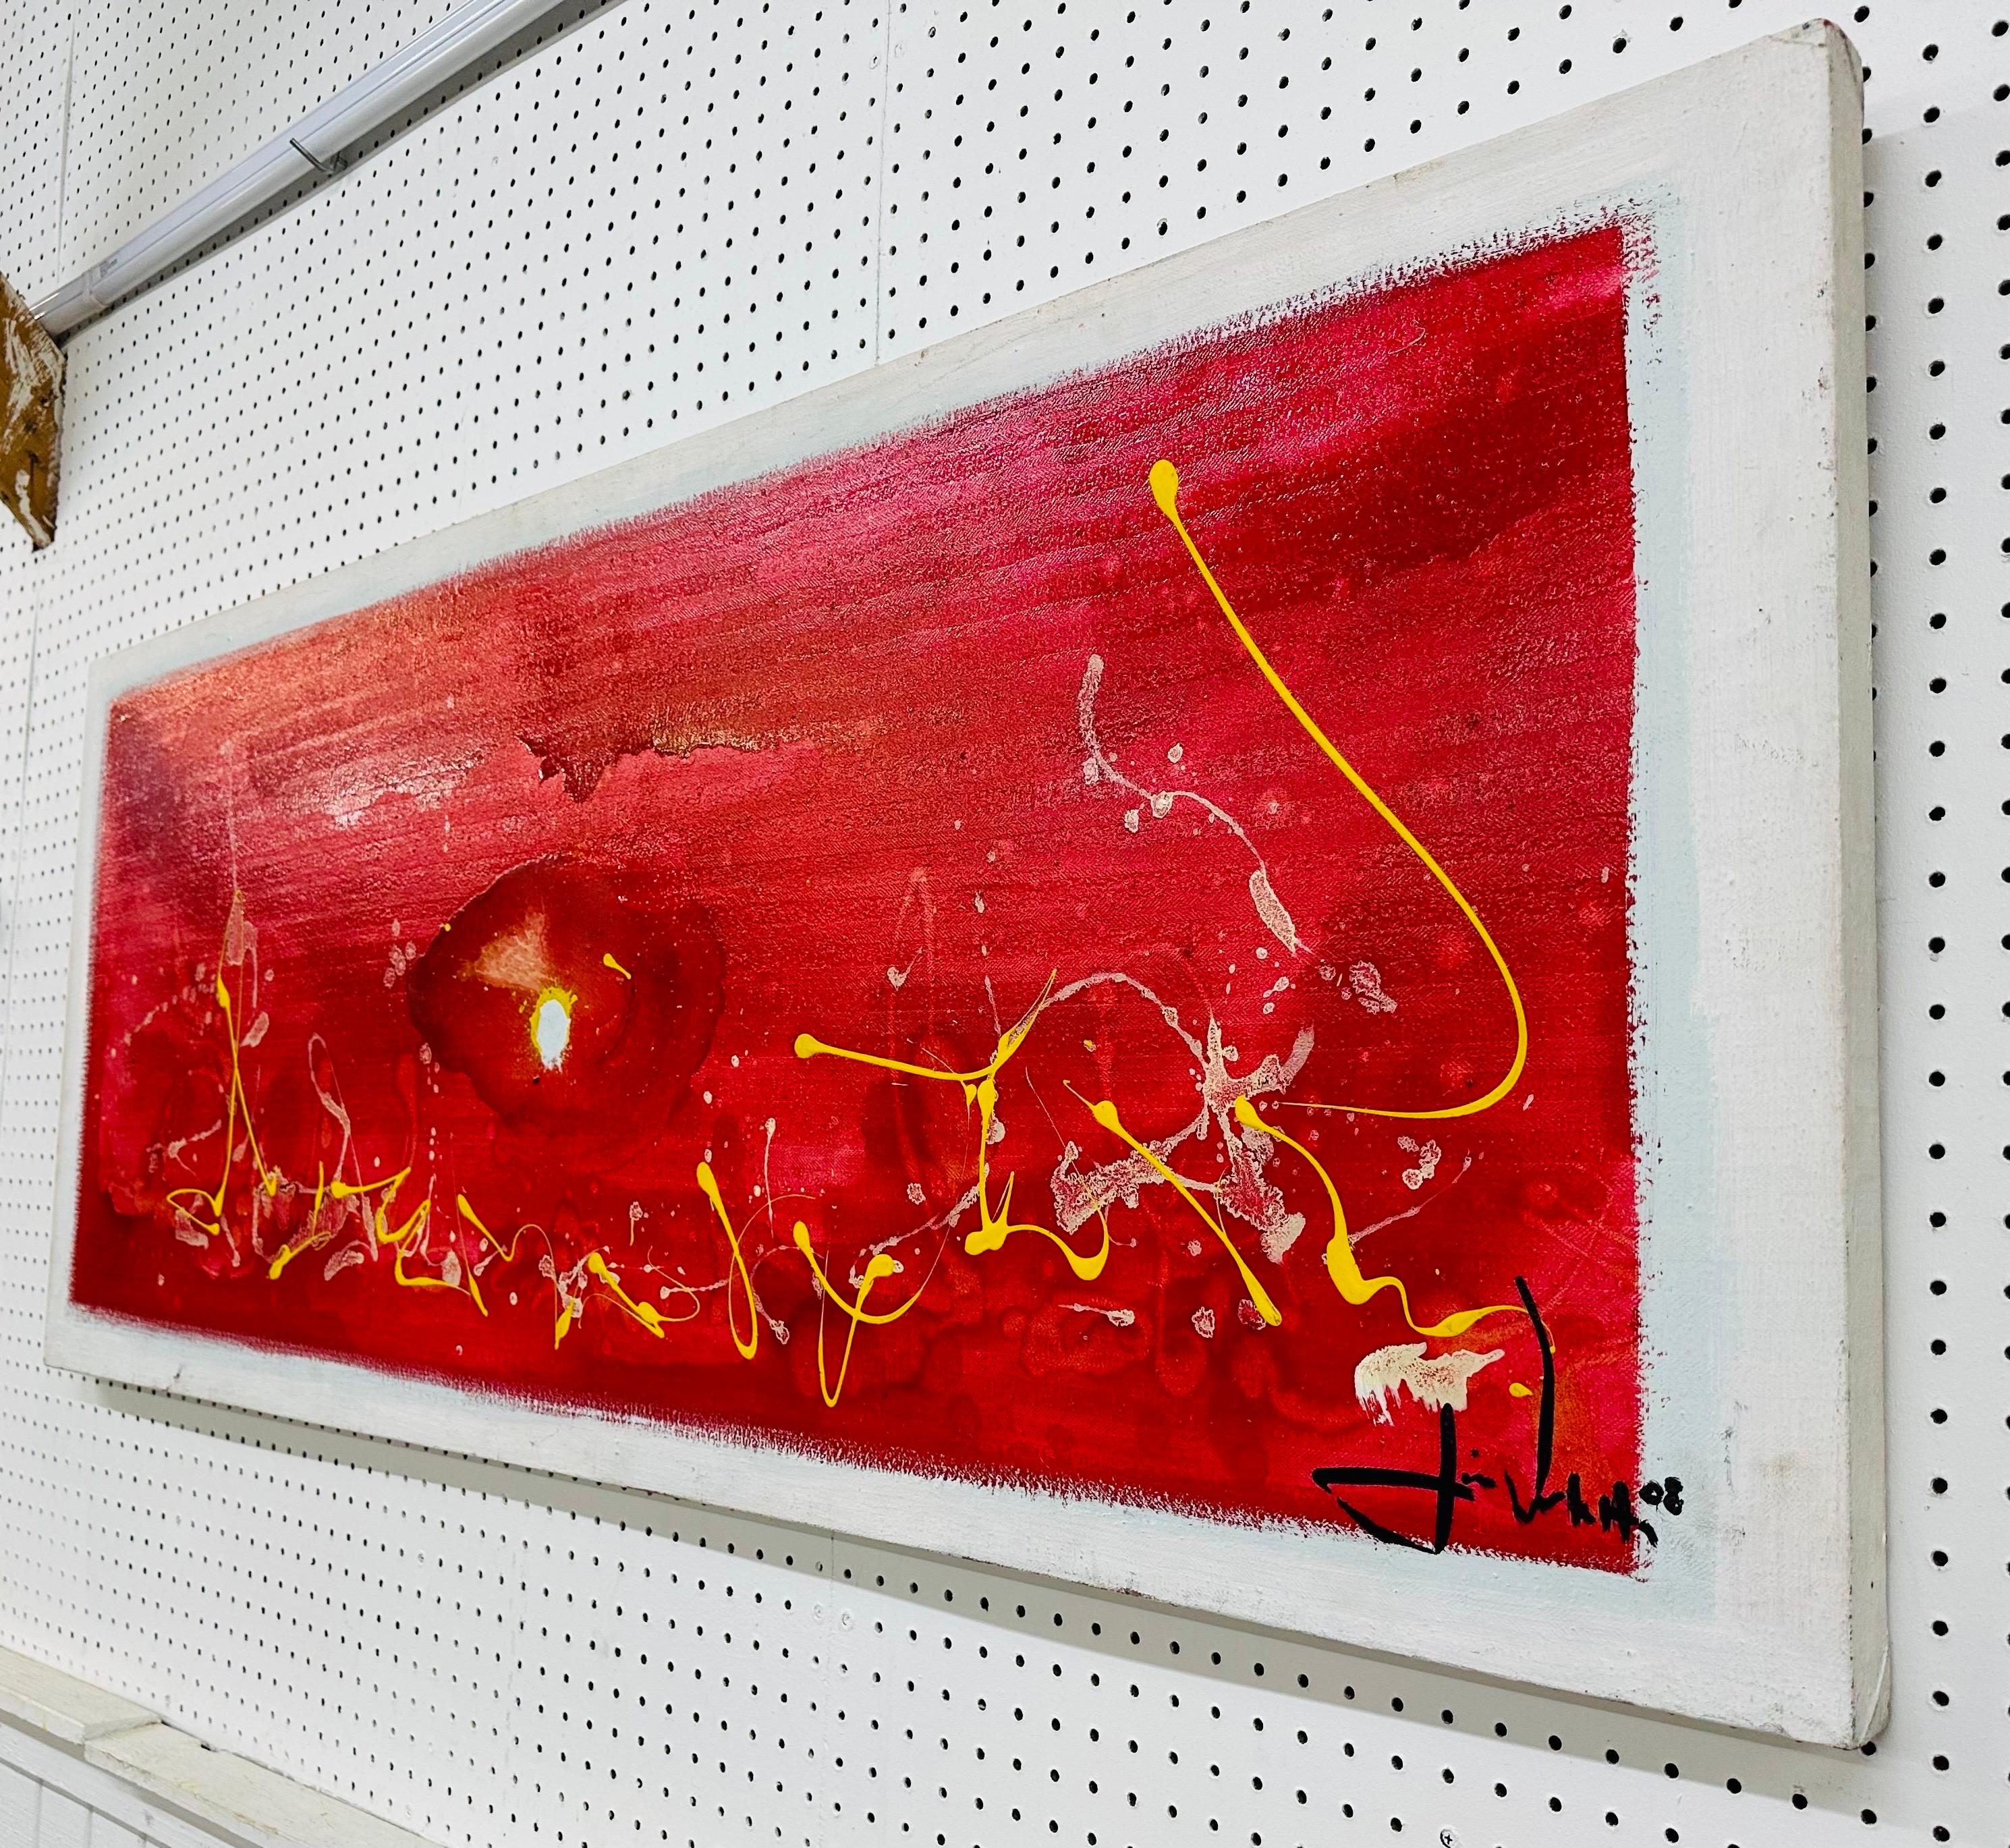 This listing is for a Modern Abstract Expressionist Painting. Featuring a rectangular canvas, a mixture of red, white, and yellow colors, and signed on the bottom right.